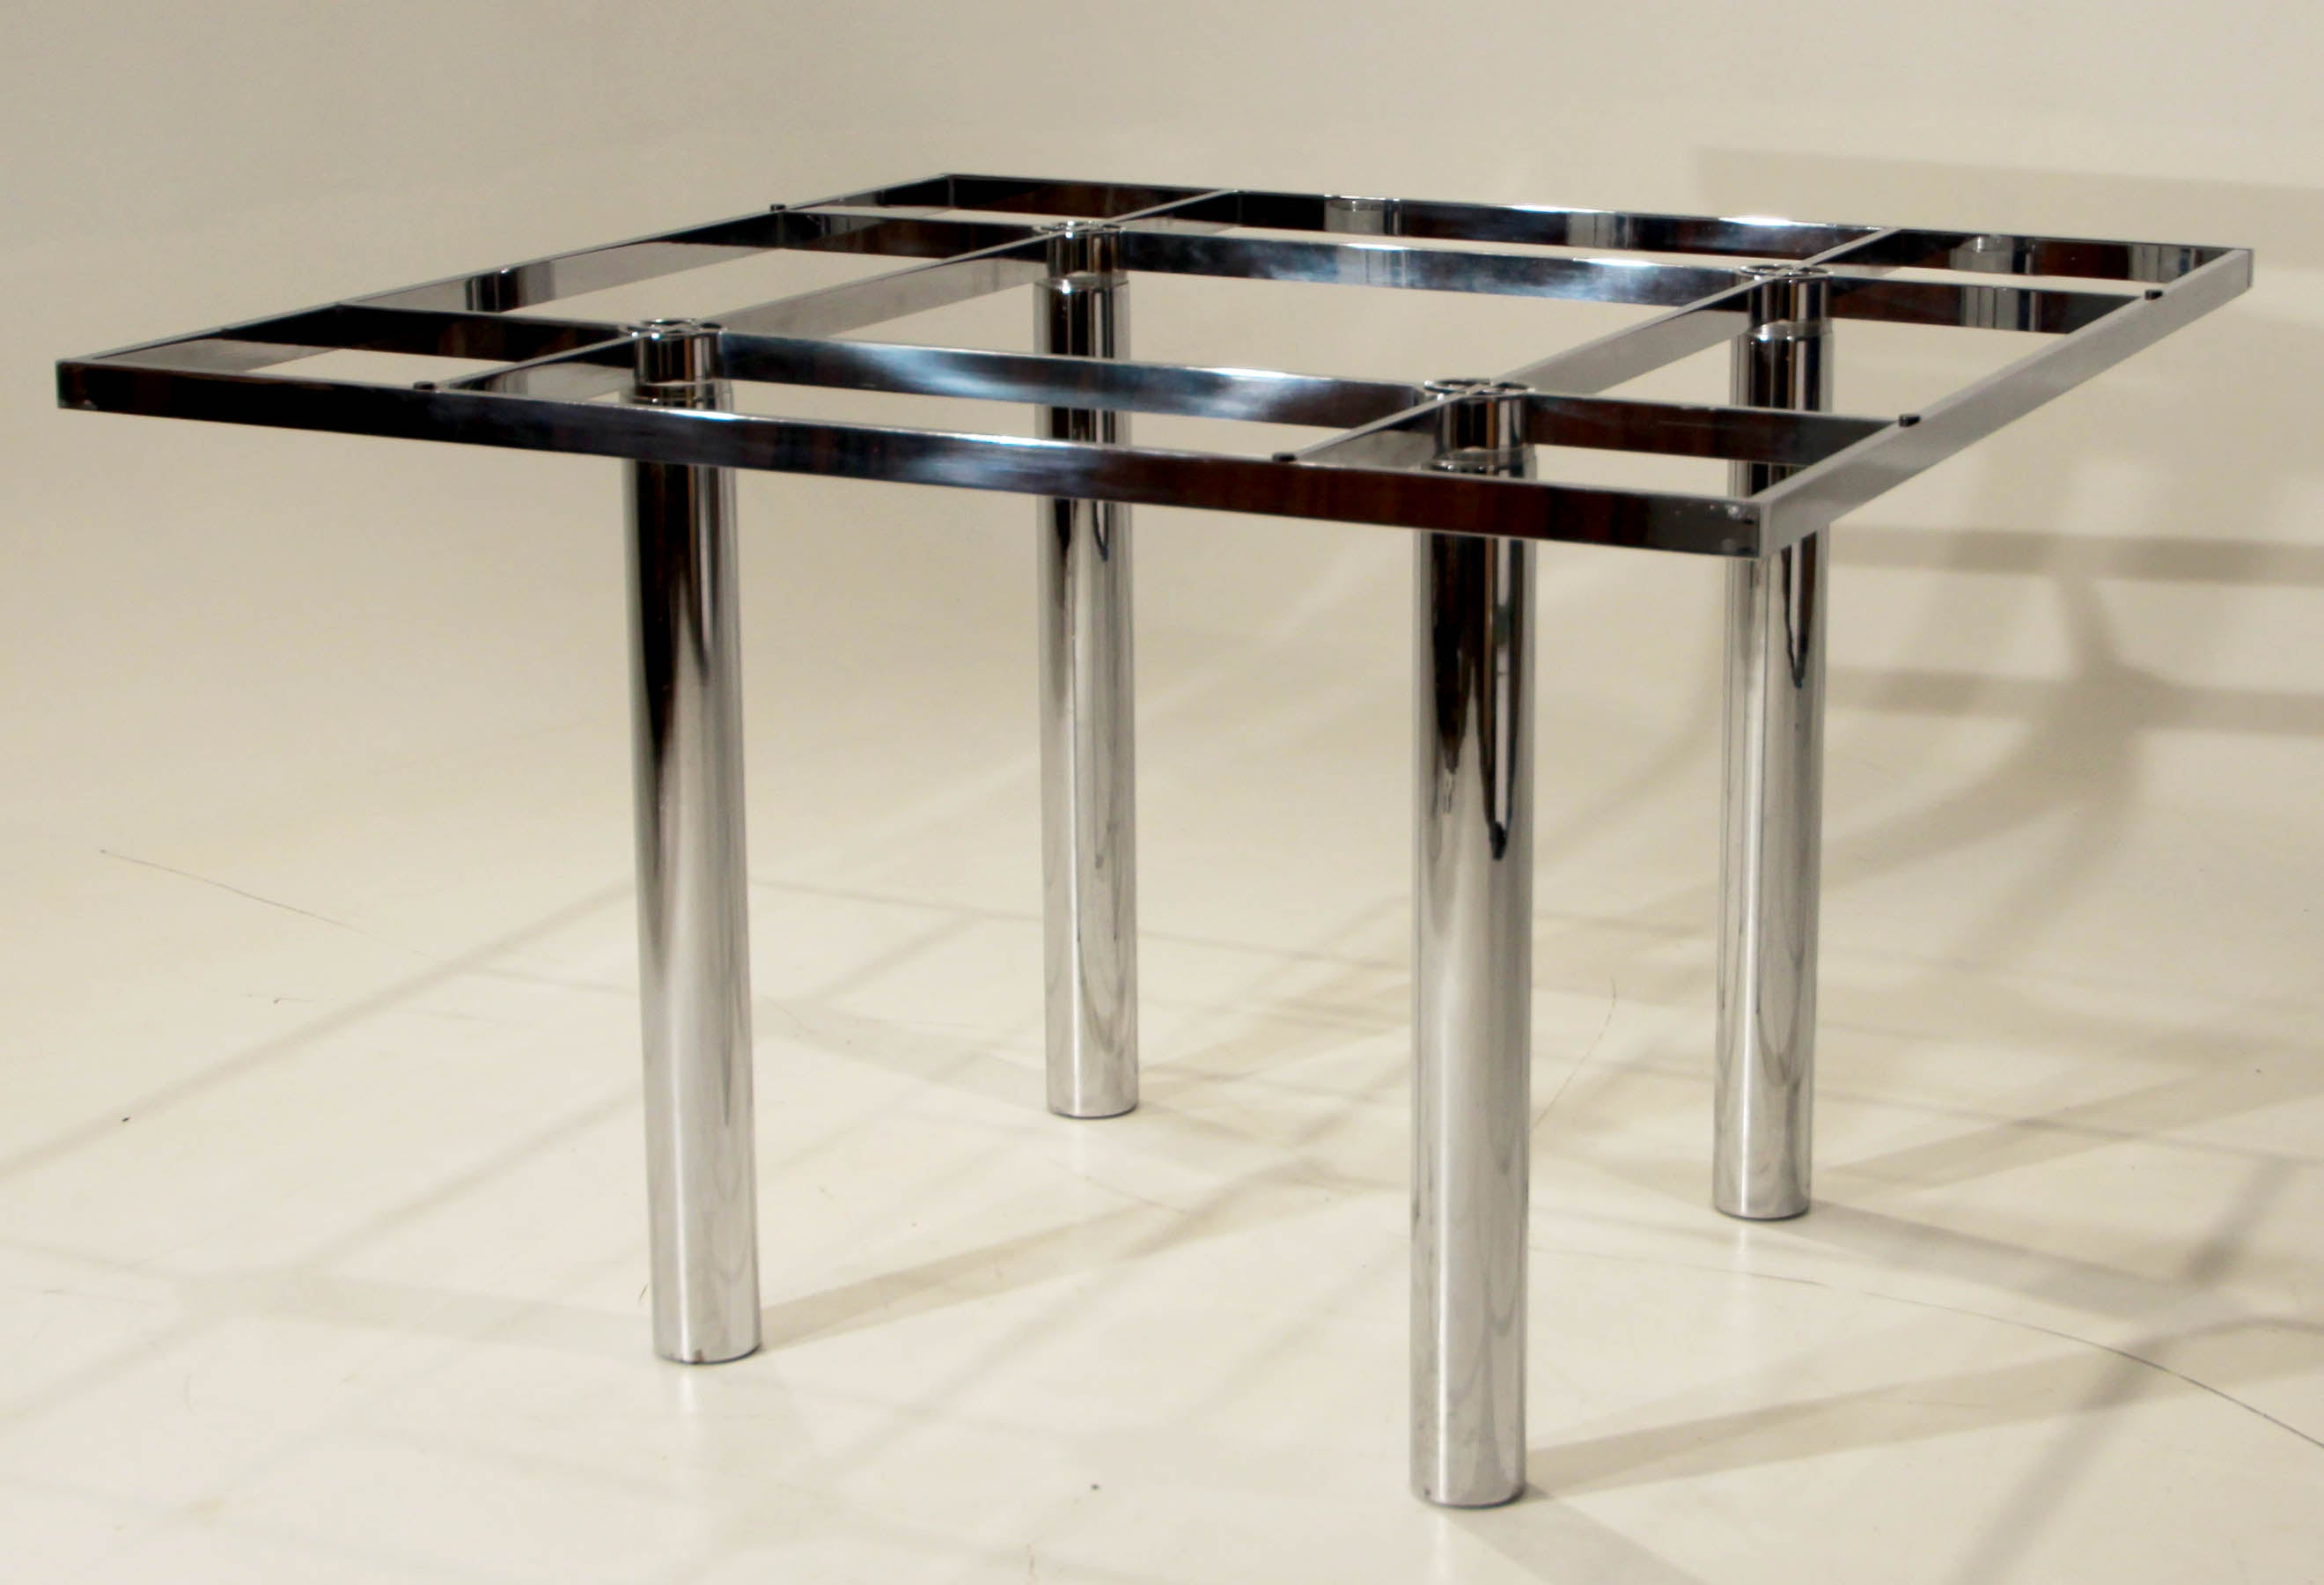 Tobia Scarpa for Knoll "Andre" Chrome and Glass Top Dining Table For Sale